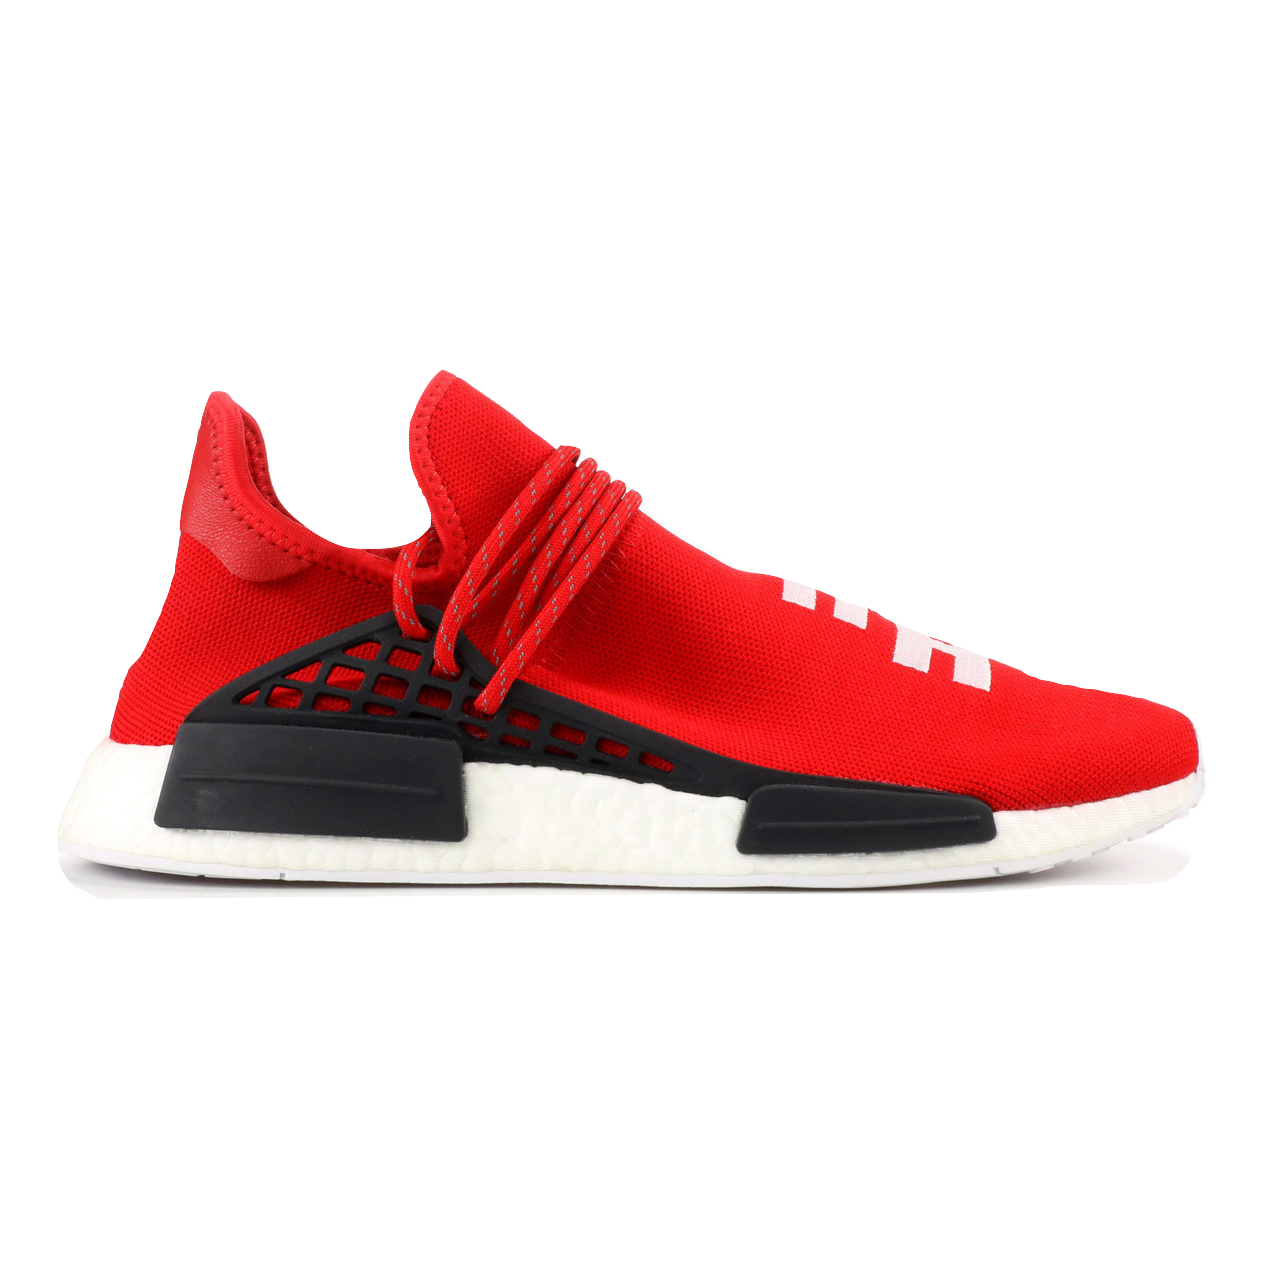 PW Human Race NMD - Red